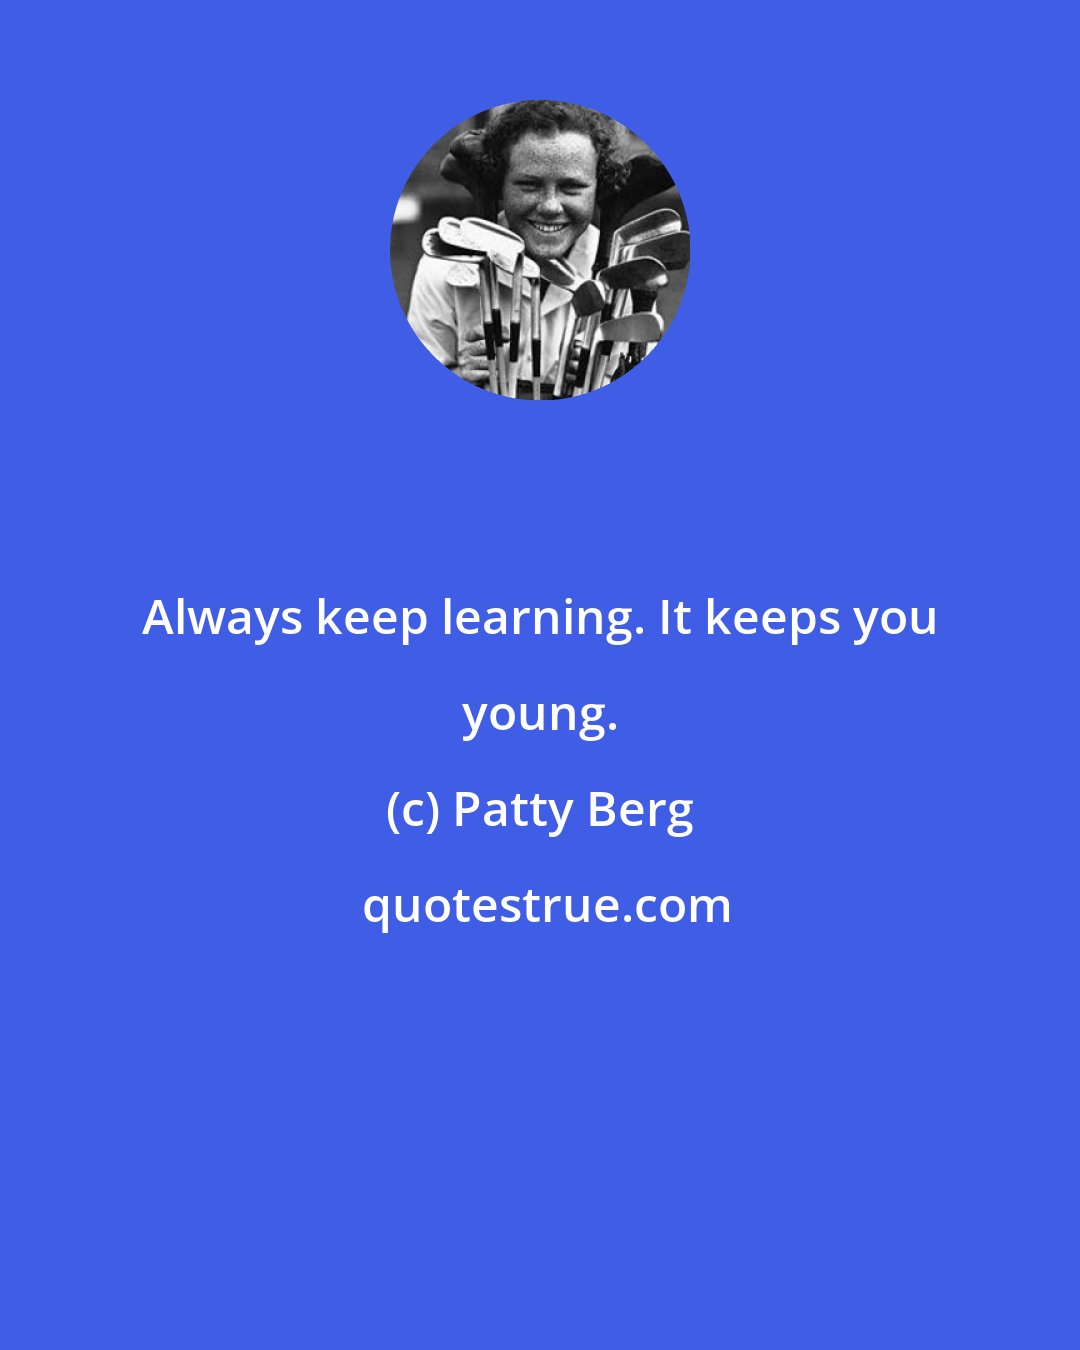 Patty Berg: Always keep learning. It keeps you young.